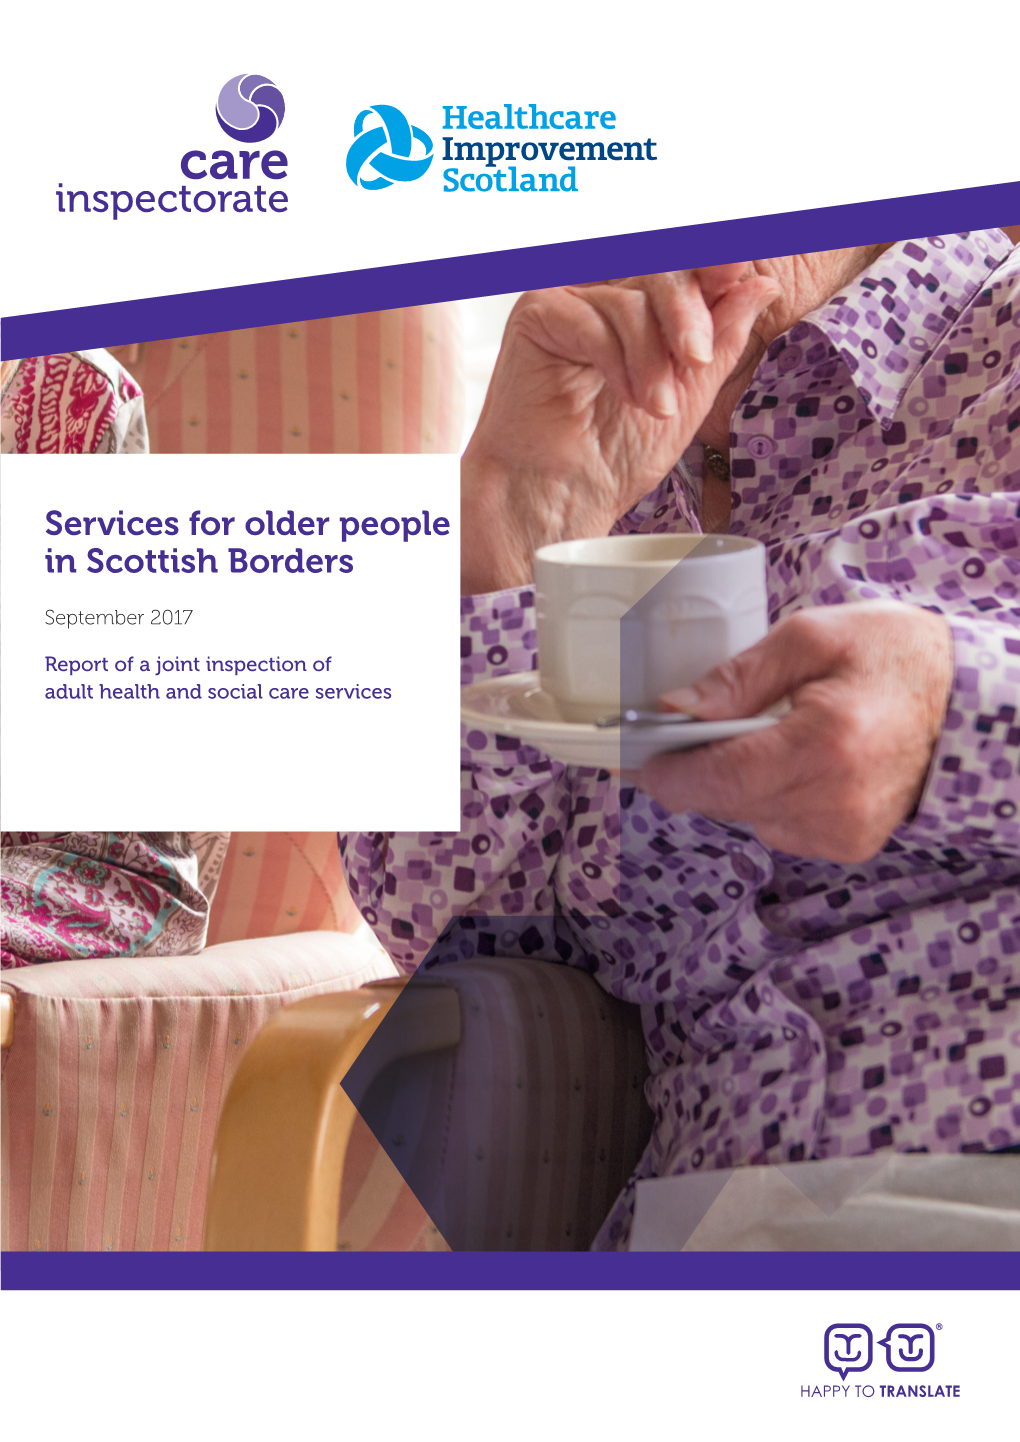 Services for Older People in Scottish Borders